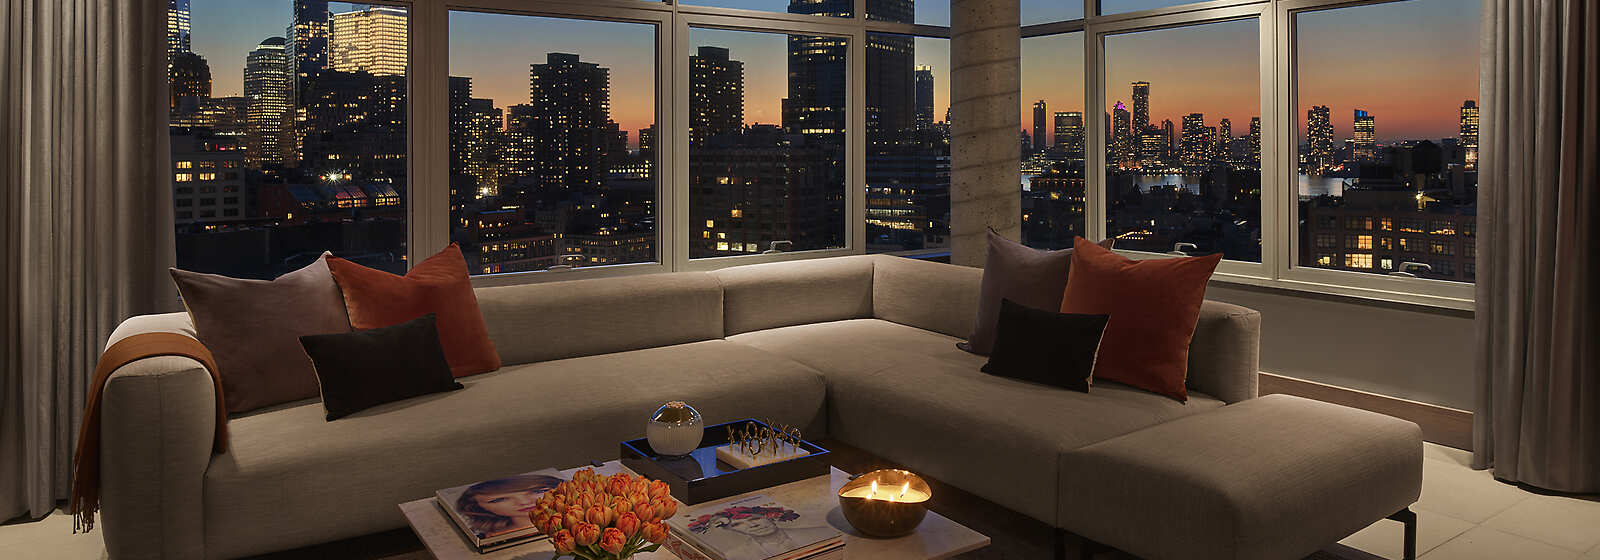 Penthouse Living Room